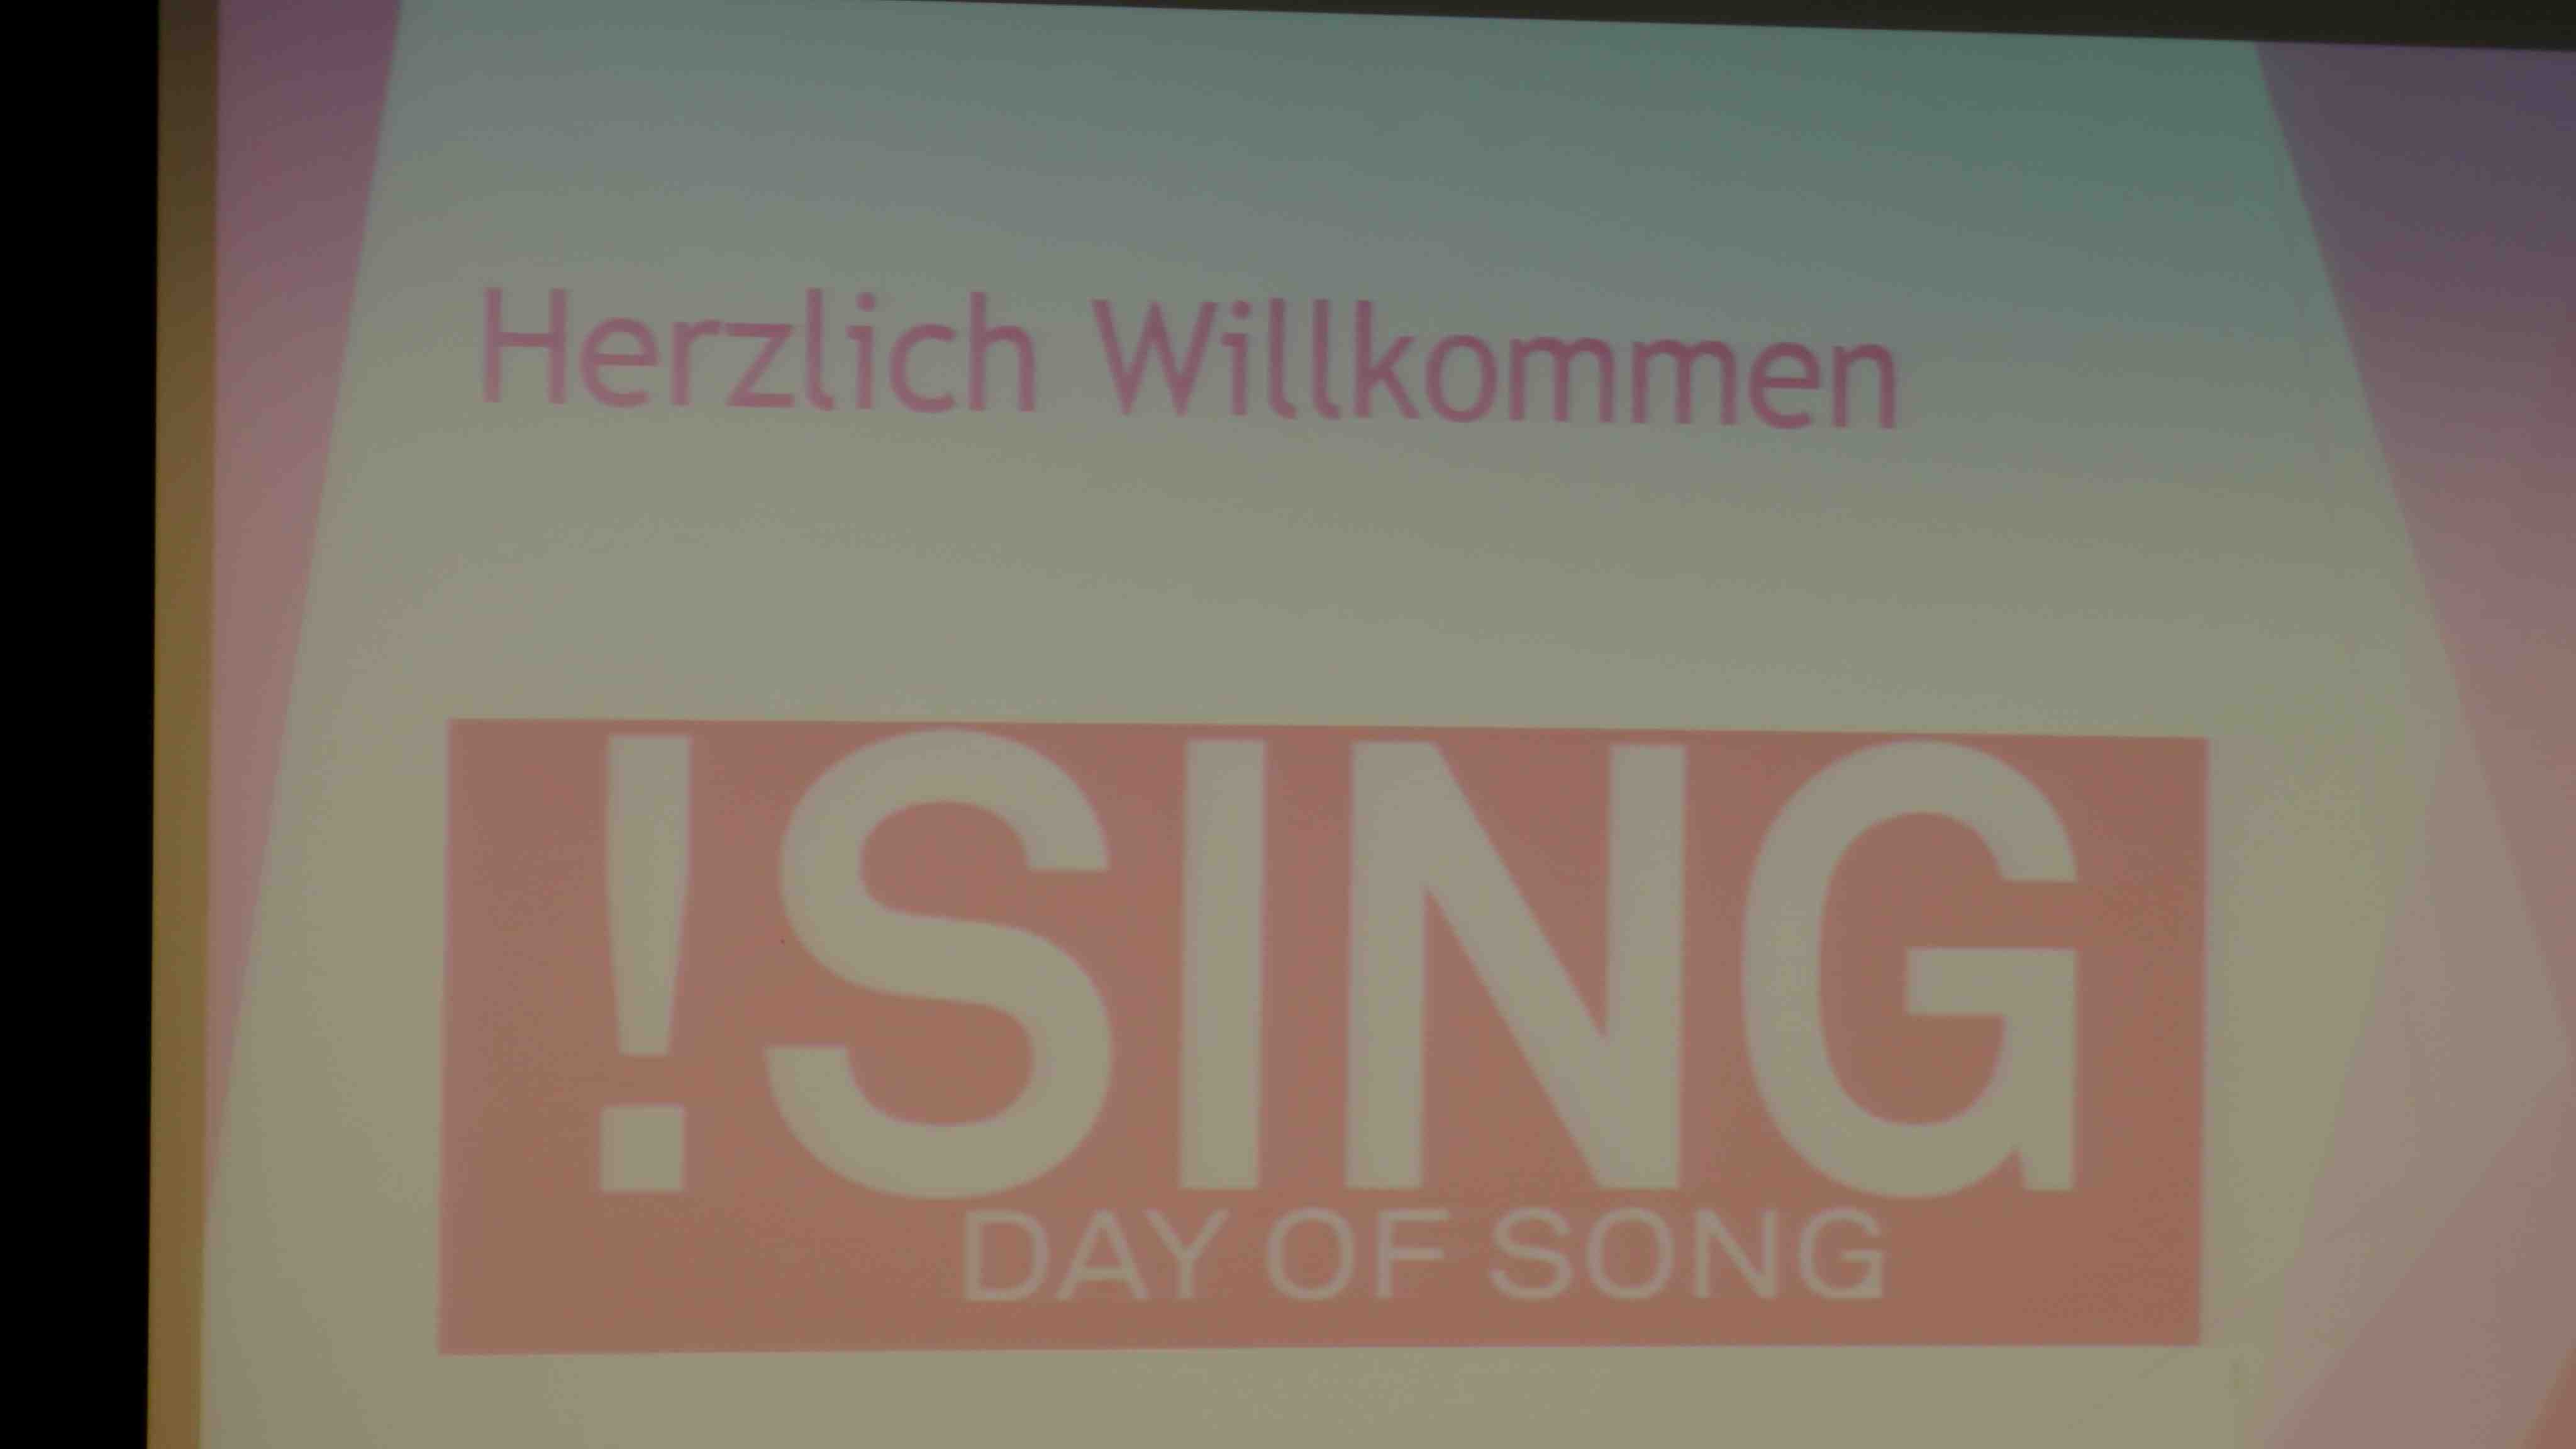 Day of song 2014_301